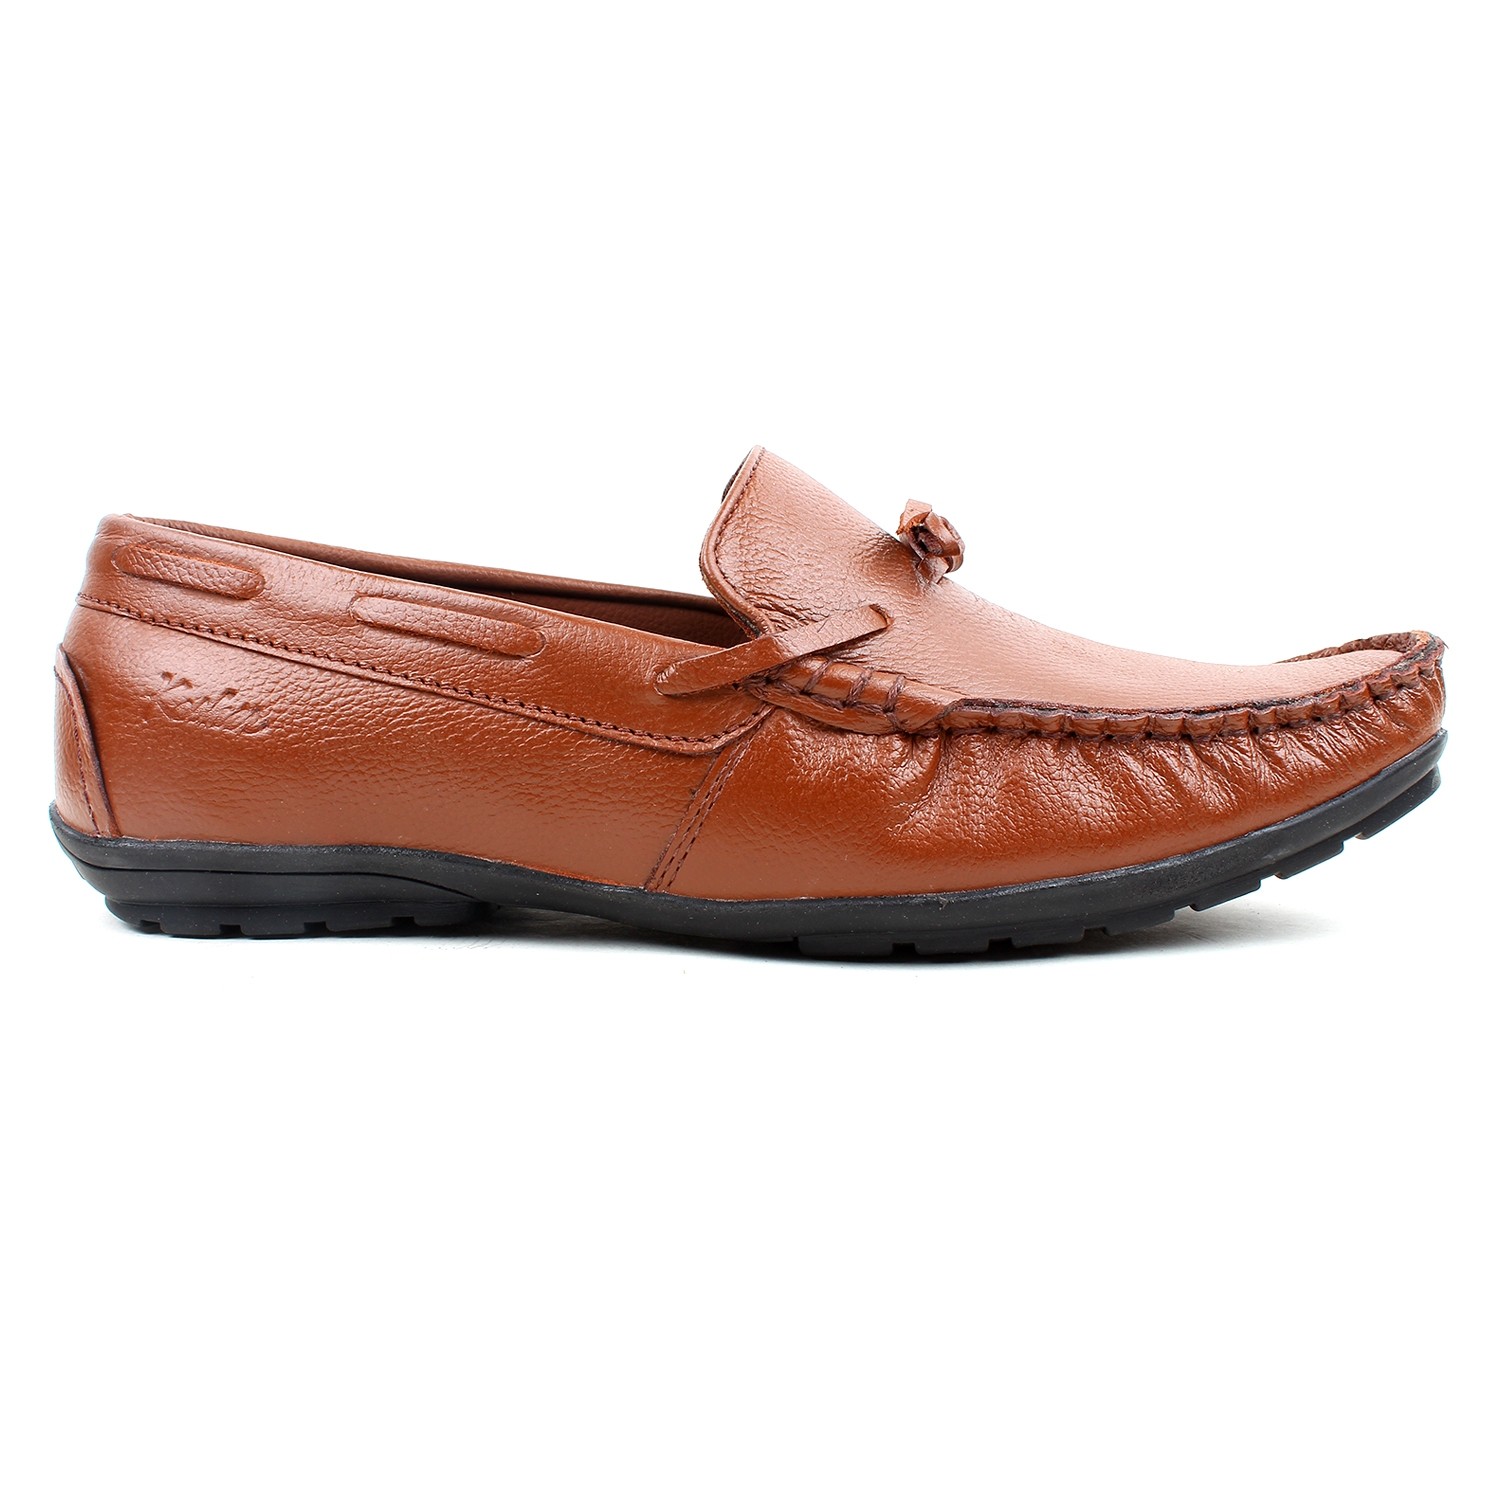 Leather Shoes Brown - MEN SHOES